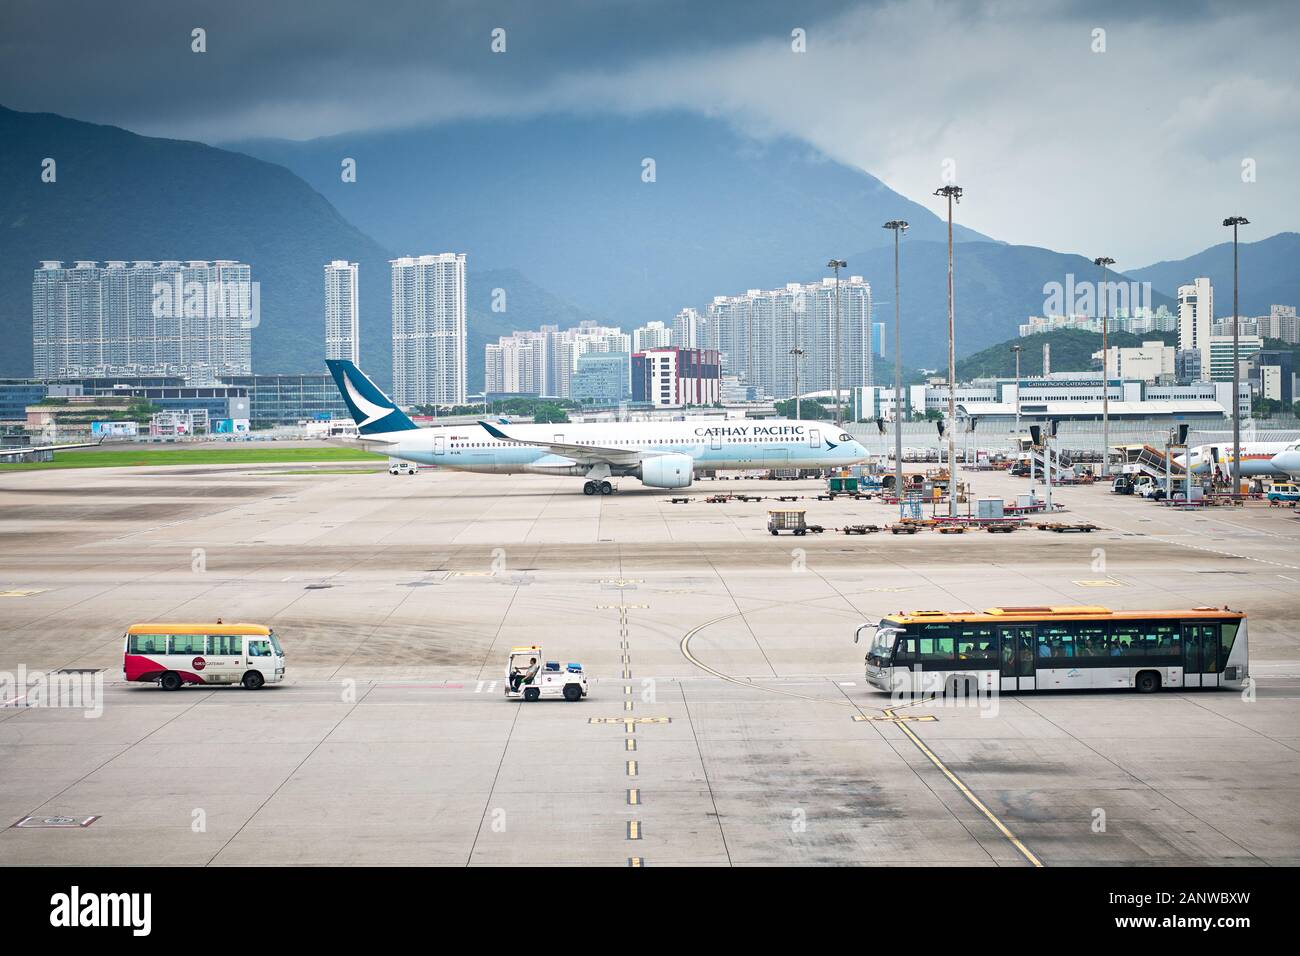 Hong Kong: View at the aircraft parking area at Hong Kong International Airport with skyscrapers and mountains in the background Stock Photo